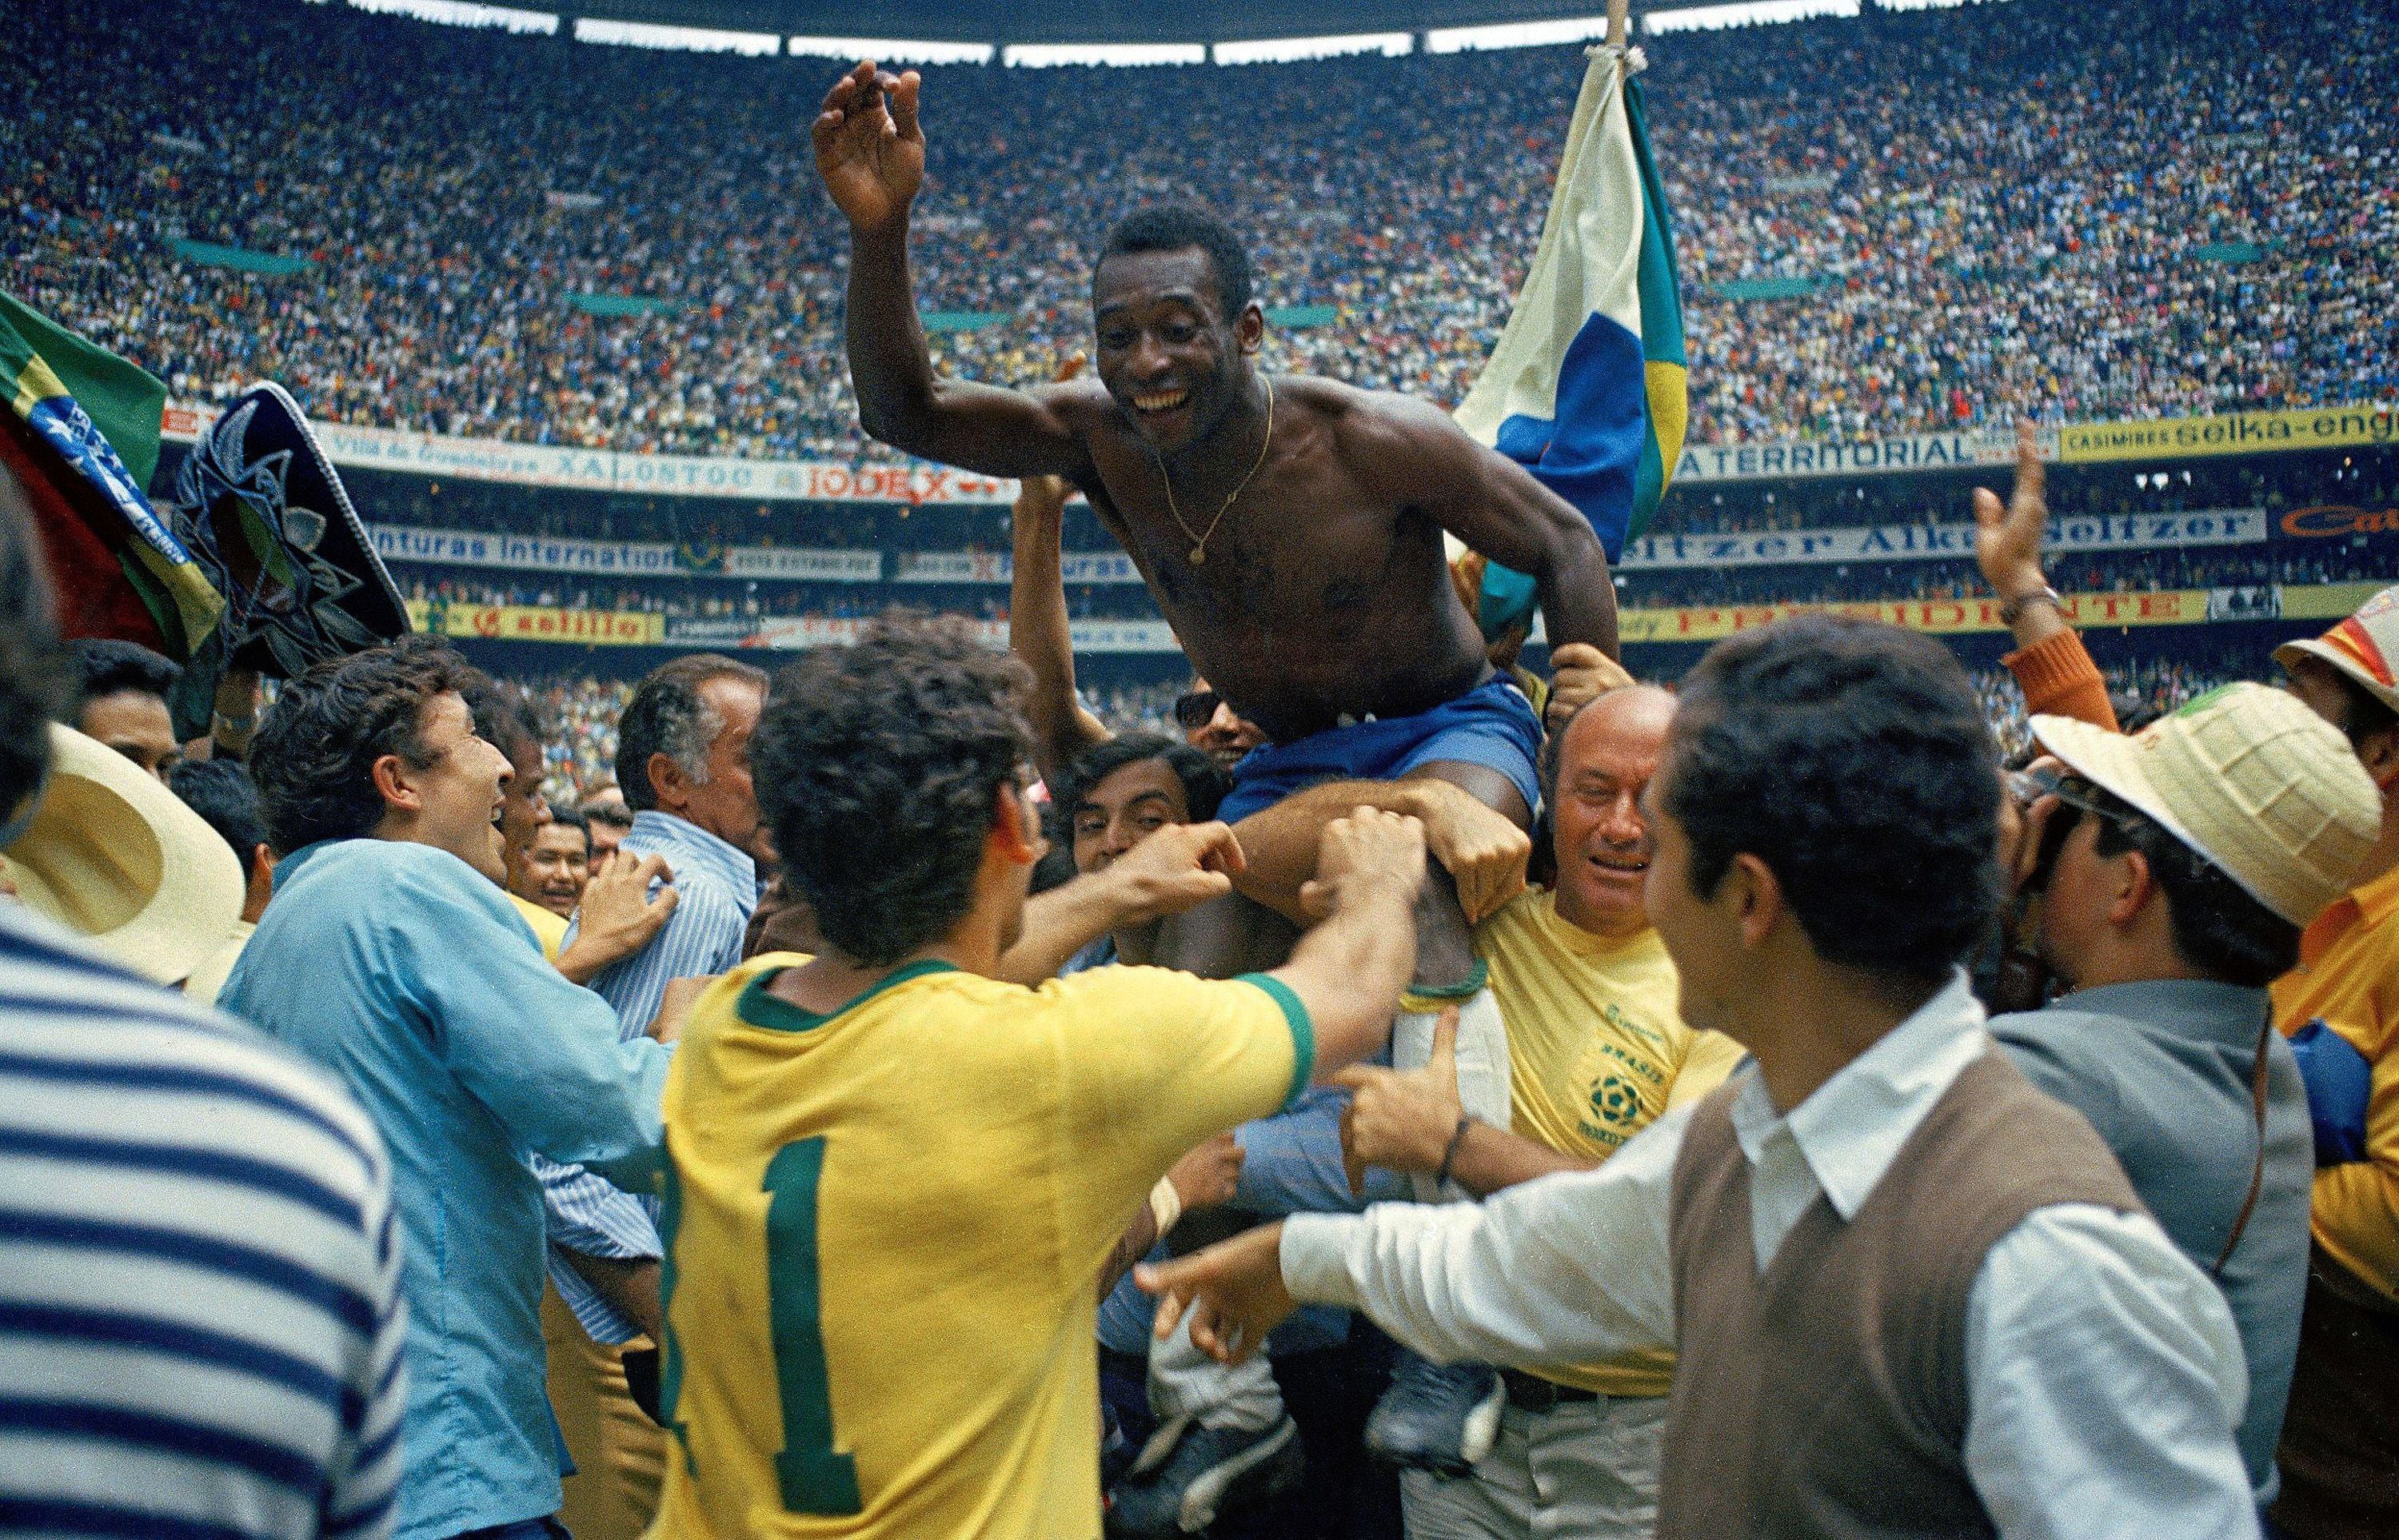 Edson Arantes Do Nascimento Pele of Brazil celebrates the victory after winnings the 1970 World Cup in Mexico match between Brazil and Italy at Estadio Azteca on 21 June in CittÃ  del Messico. Mexico (Photo by Alessandro Sabattini/Getty Images) PARTIDO BRASIL - ITALIA ALEGRIA PELE A HOMBROS MUNDIAL MEJICO70 MEJICO 1970
PUBLICADA 04/08/20 NA MA32 1COL